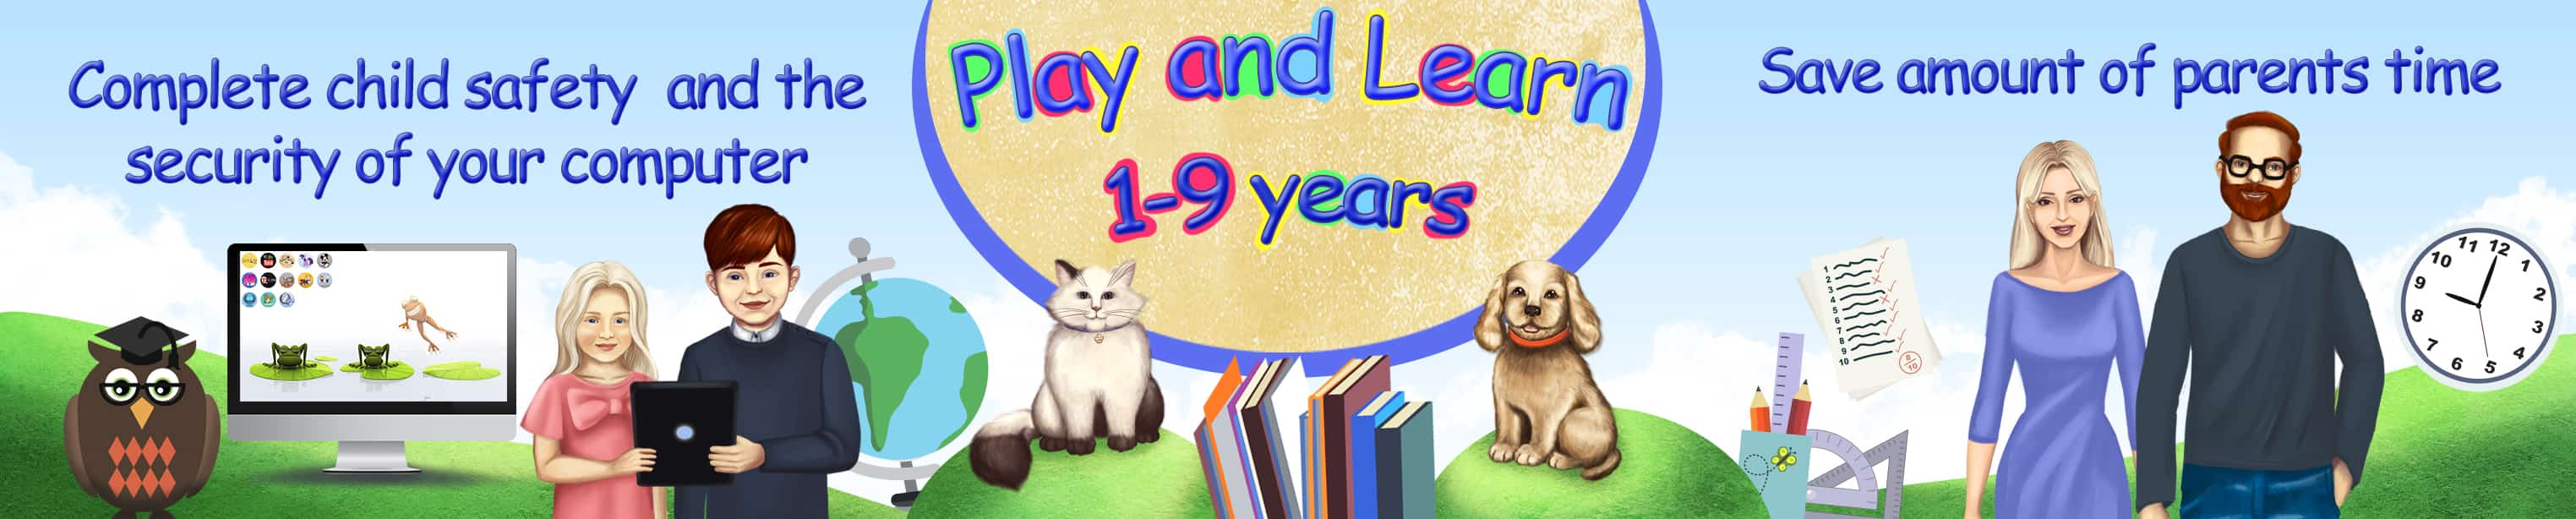 Play and Learn. Education of children from 1 to 9 years